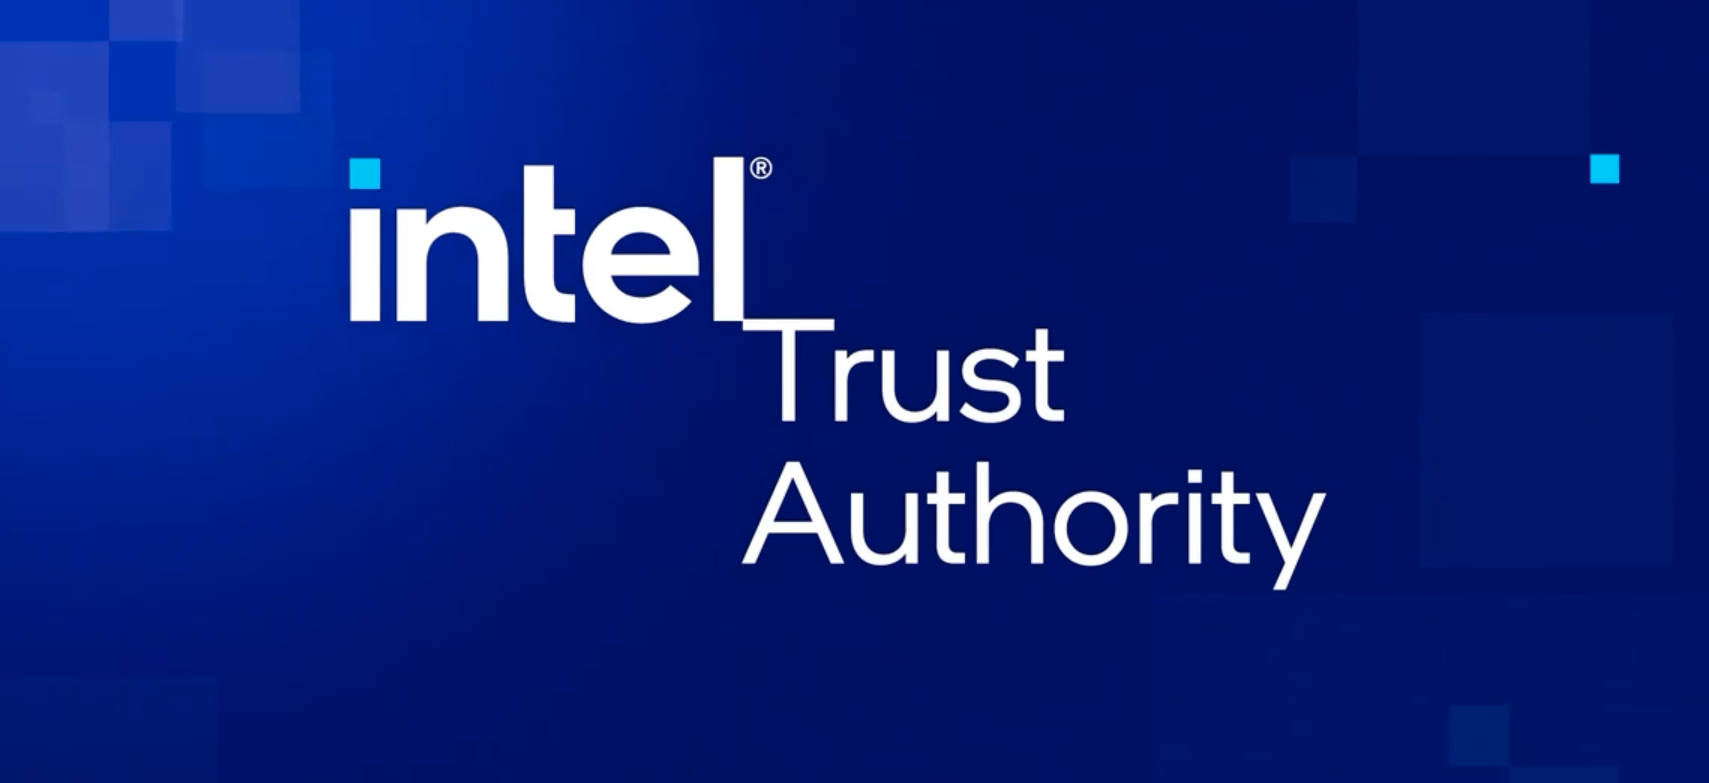 Intel Launches New Attestation Service as Part of Trust Authority Portfolio